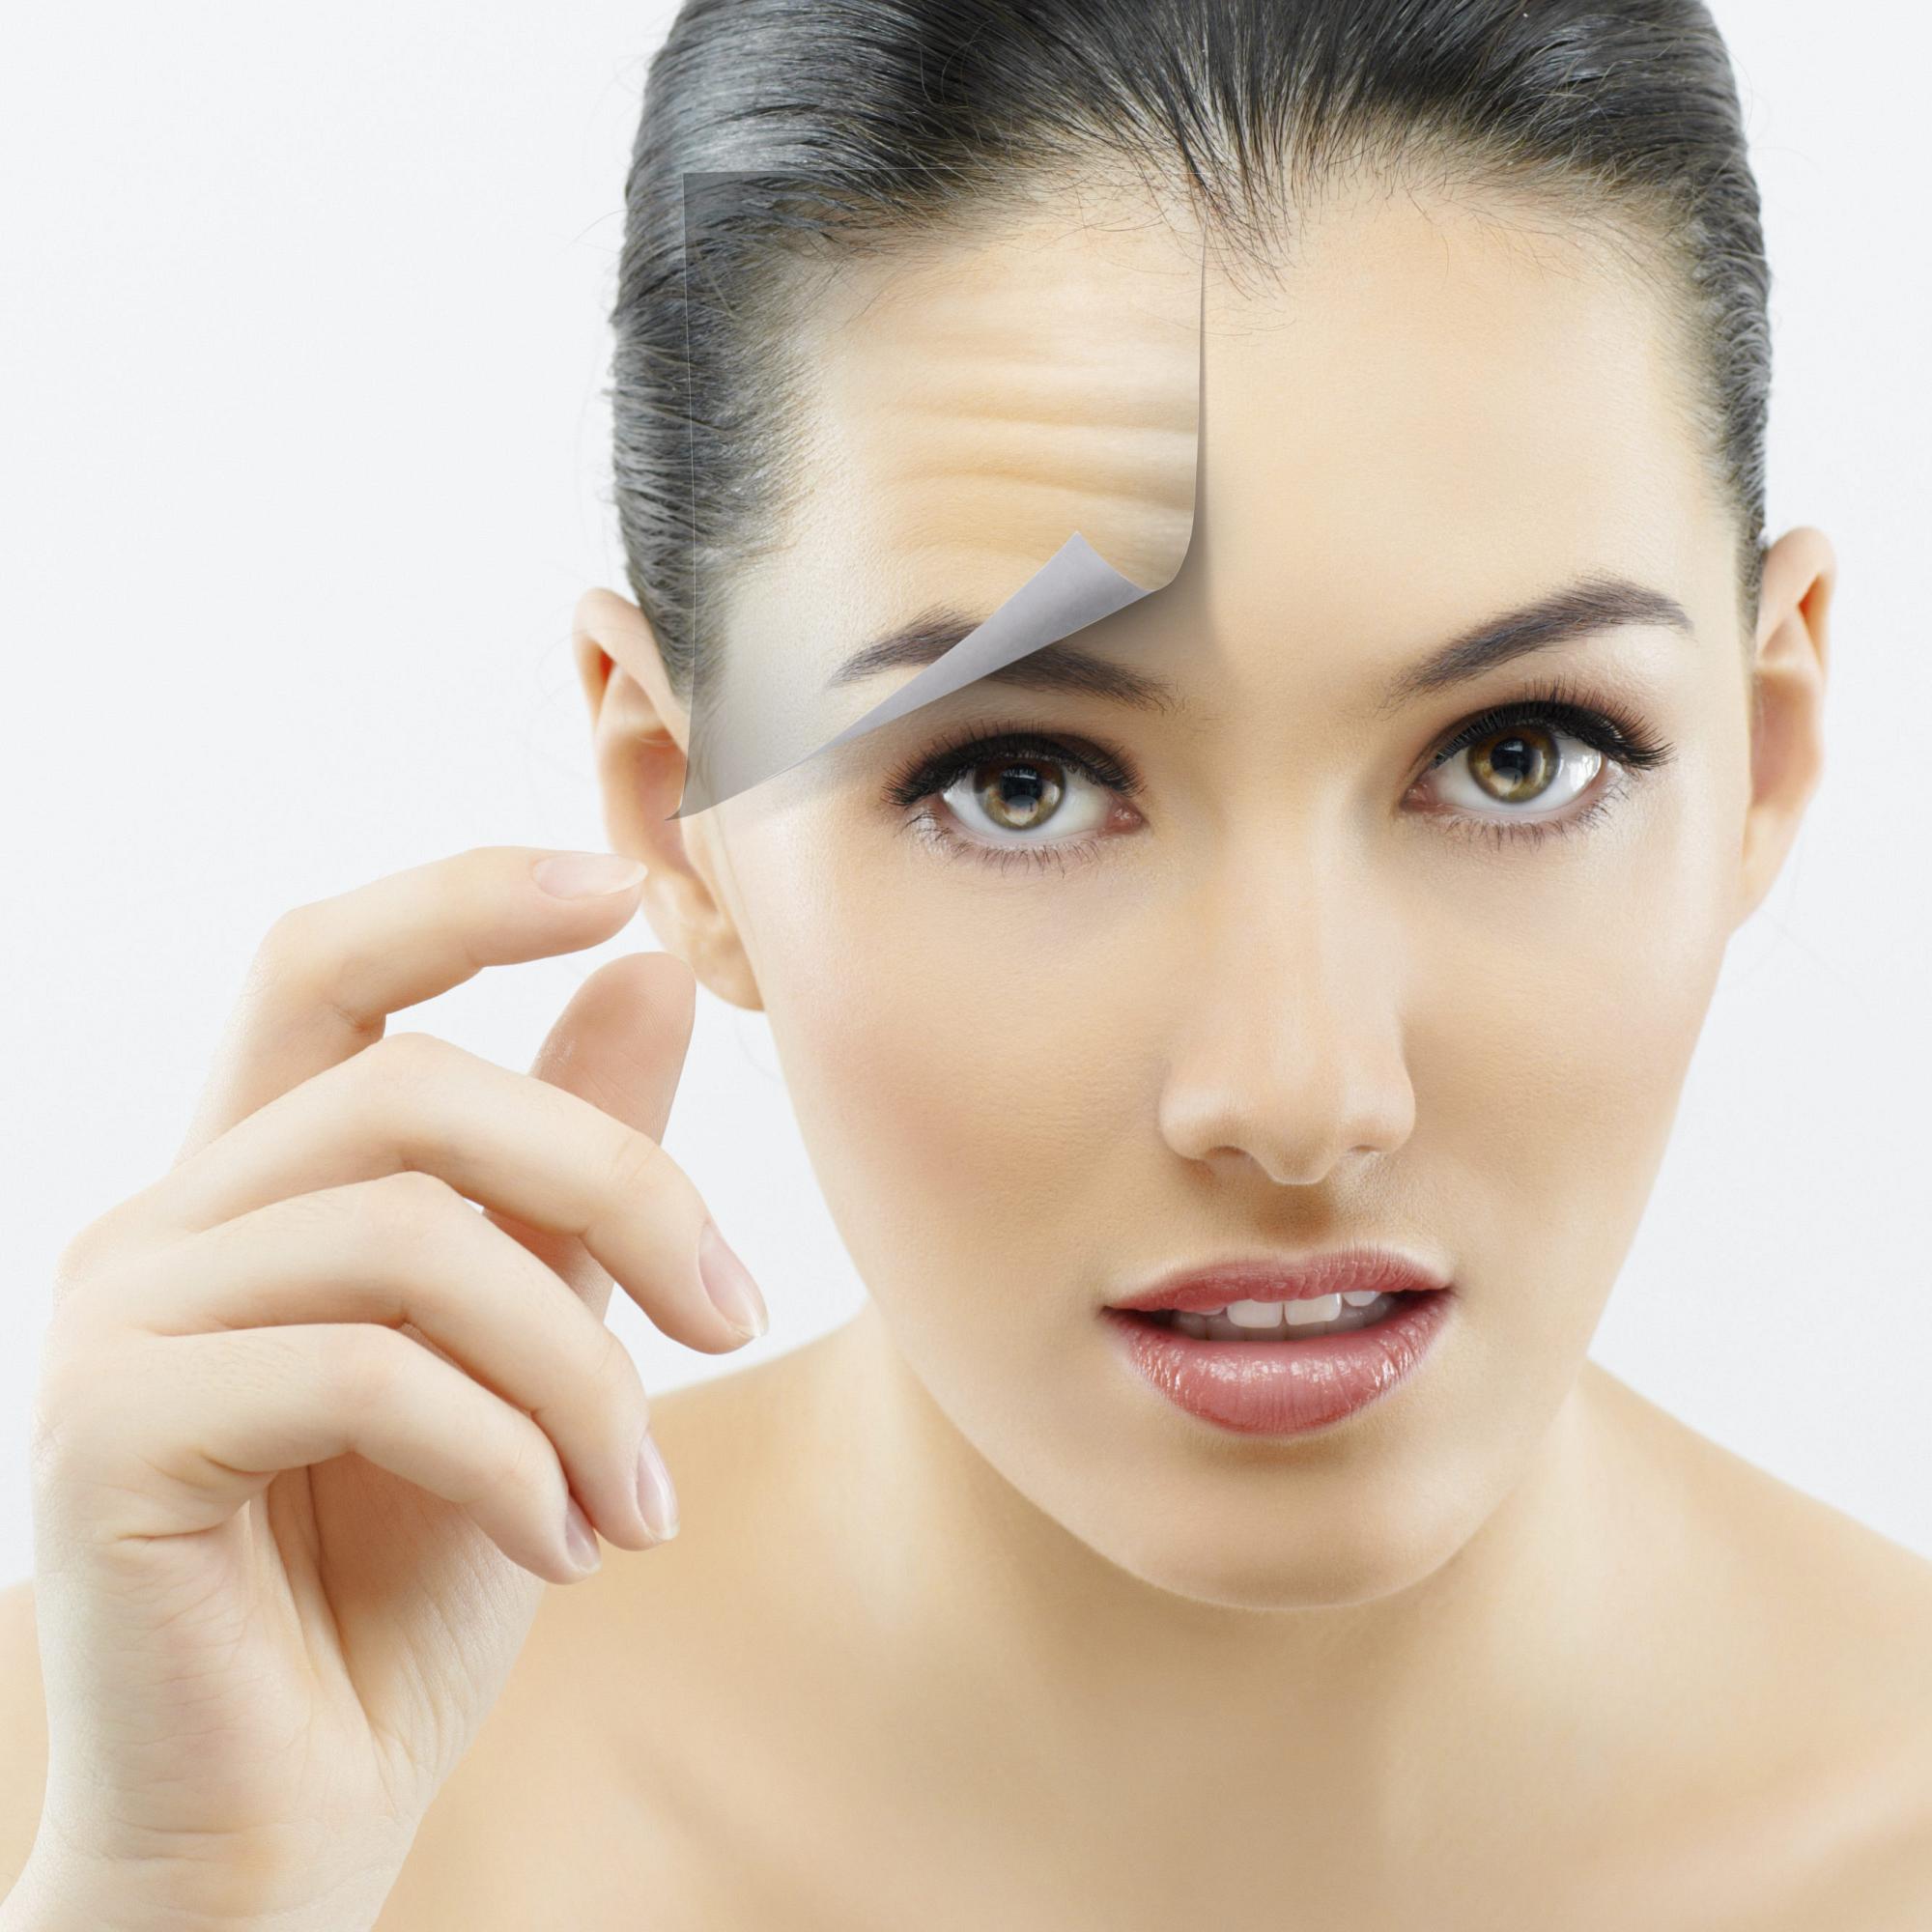 Get Rid of Wrinkles & More on Our BOTOX® Days